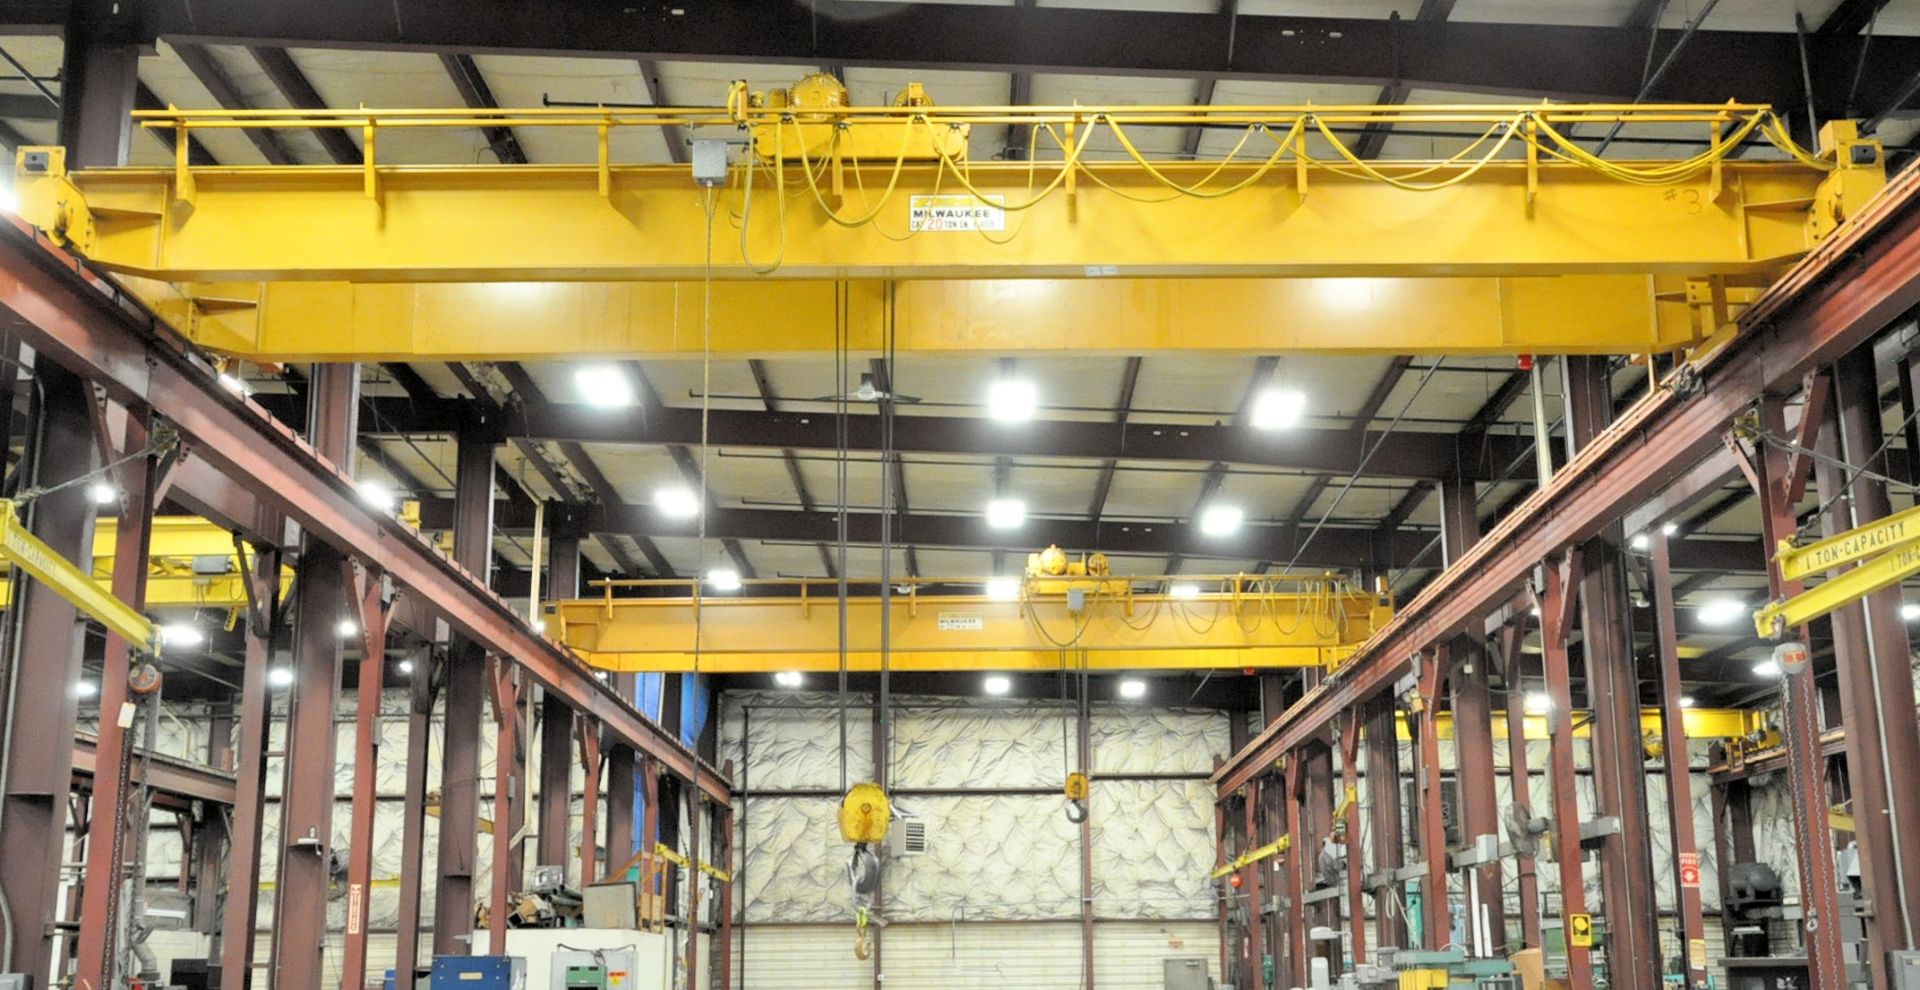 Zenar 20 Ton Overhead Crane, Span and Hoist Only, No Rails, Pendant Control, Overhung Crane and - Image 3 of 6